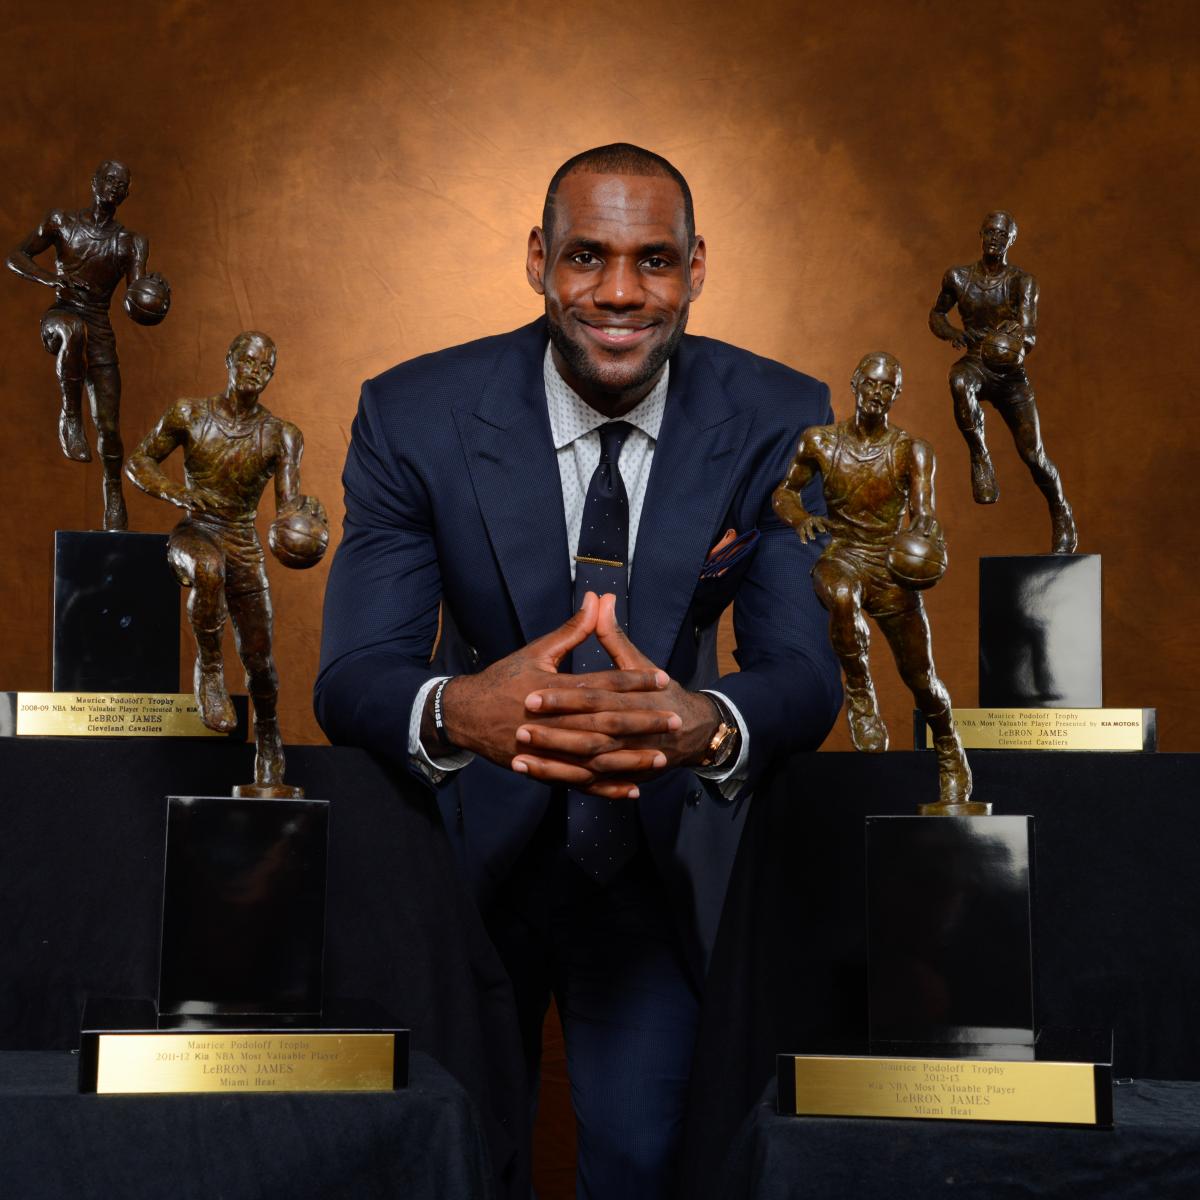 nba most valuable player trophy